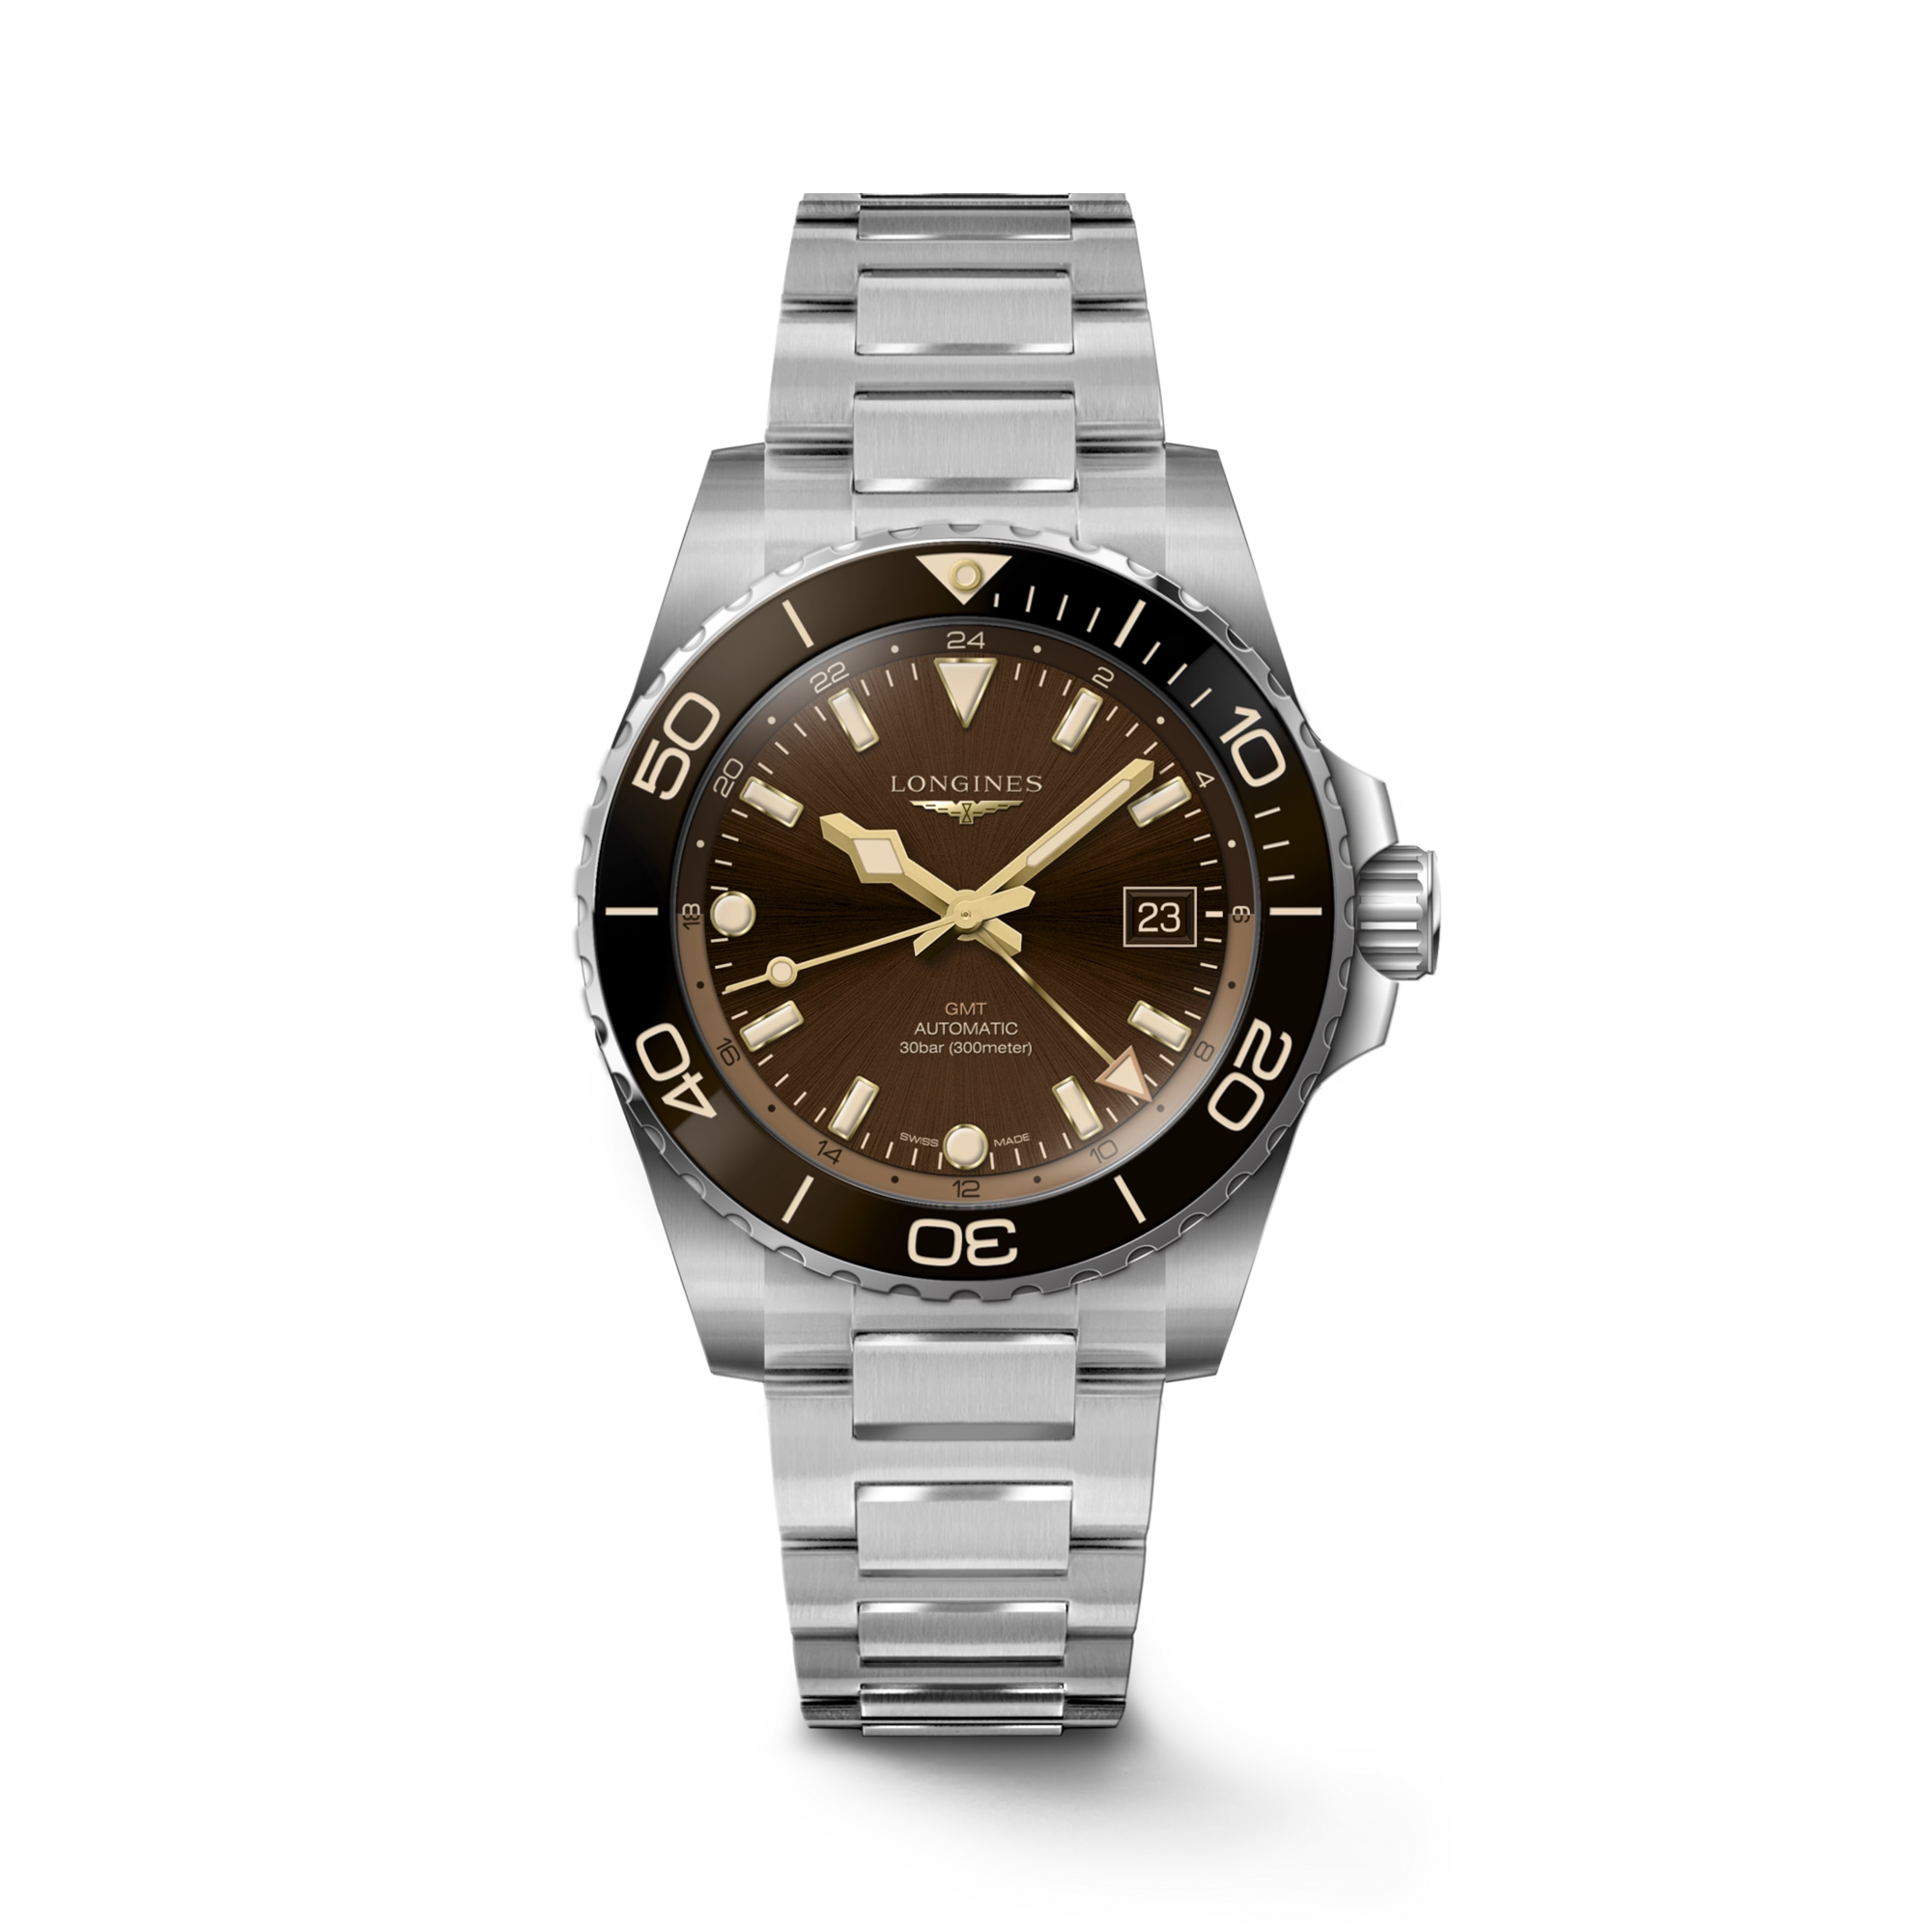 Longines Hydroconquest GMT 41mm, Brown Dial, Baton Numerals_1